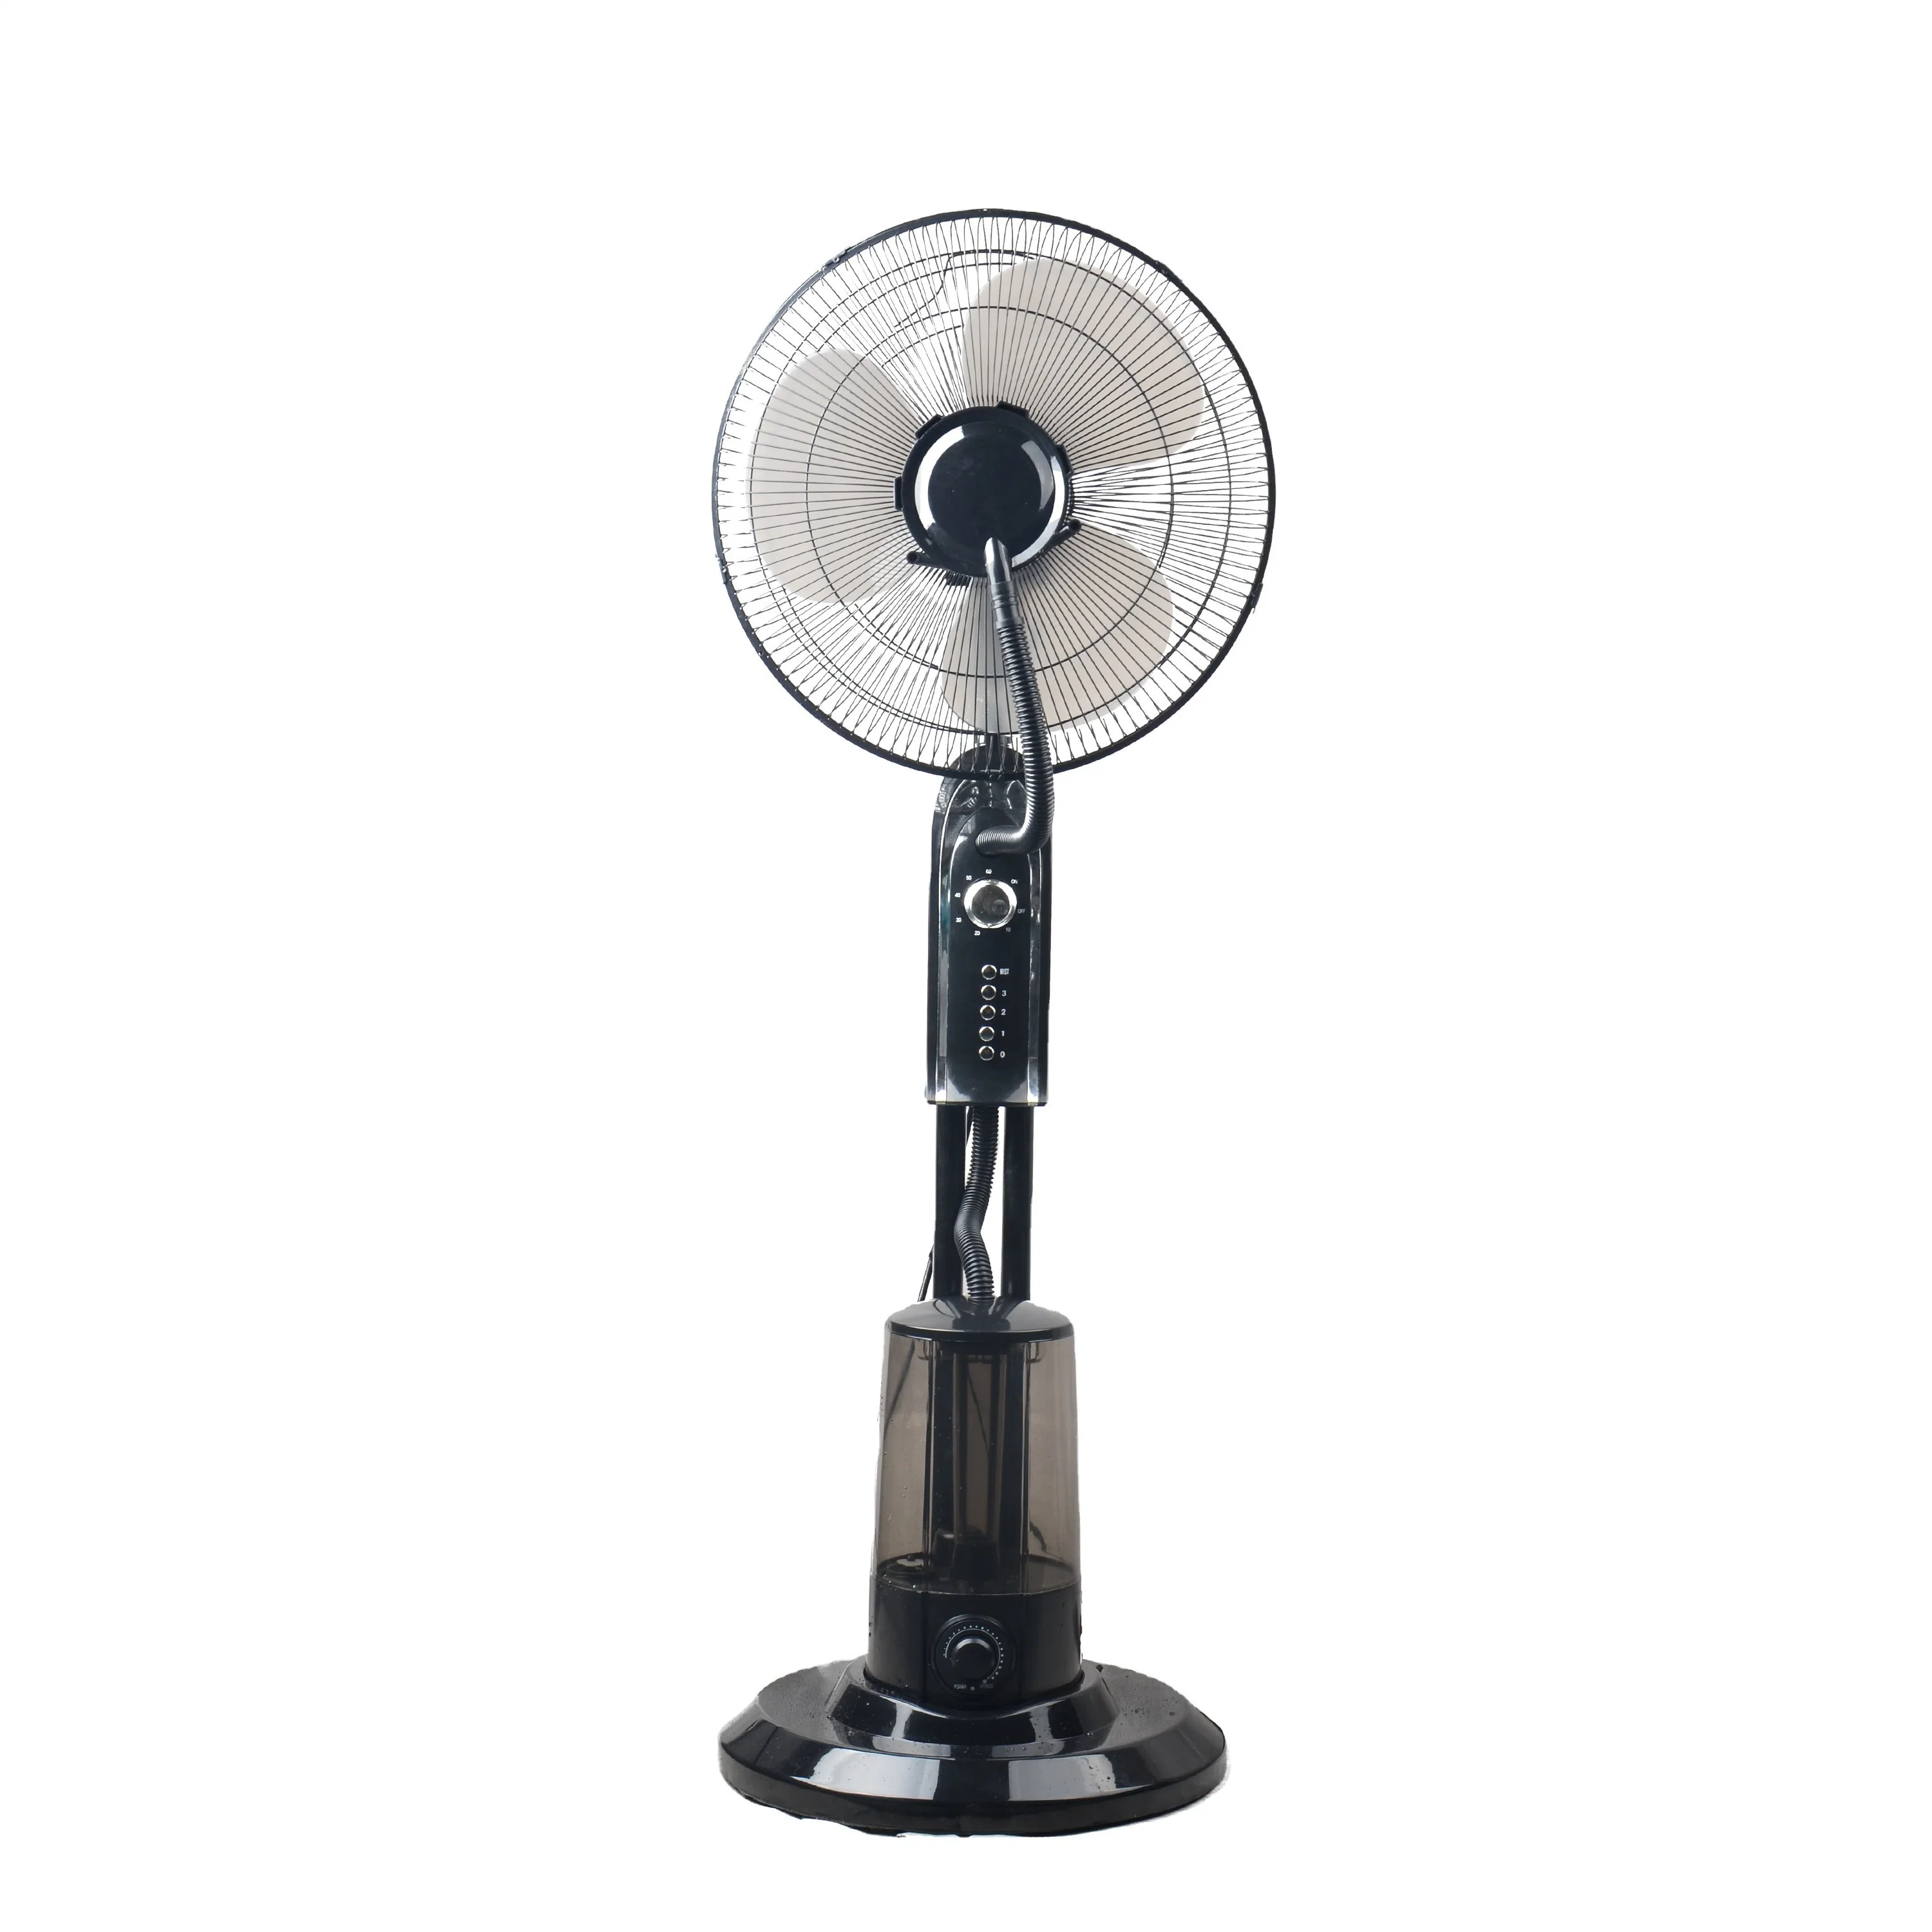 Indoor Air Cooling Fan Cooler Water Electric Spray Household Use Oscillating Mist Fans Stand Fan with Mist Water Spray